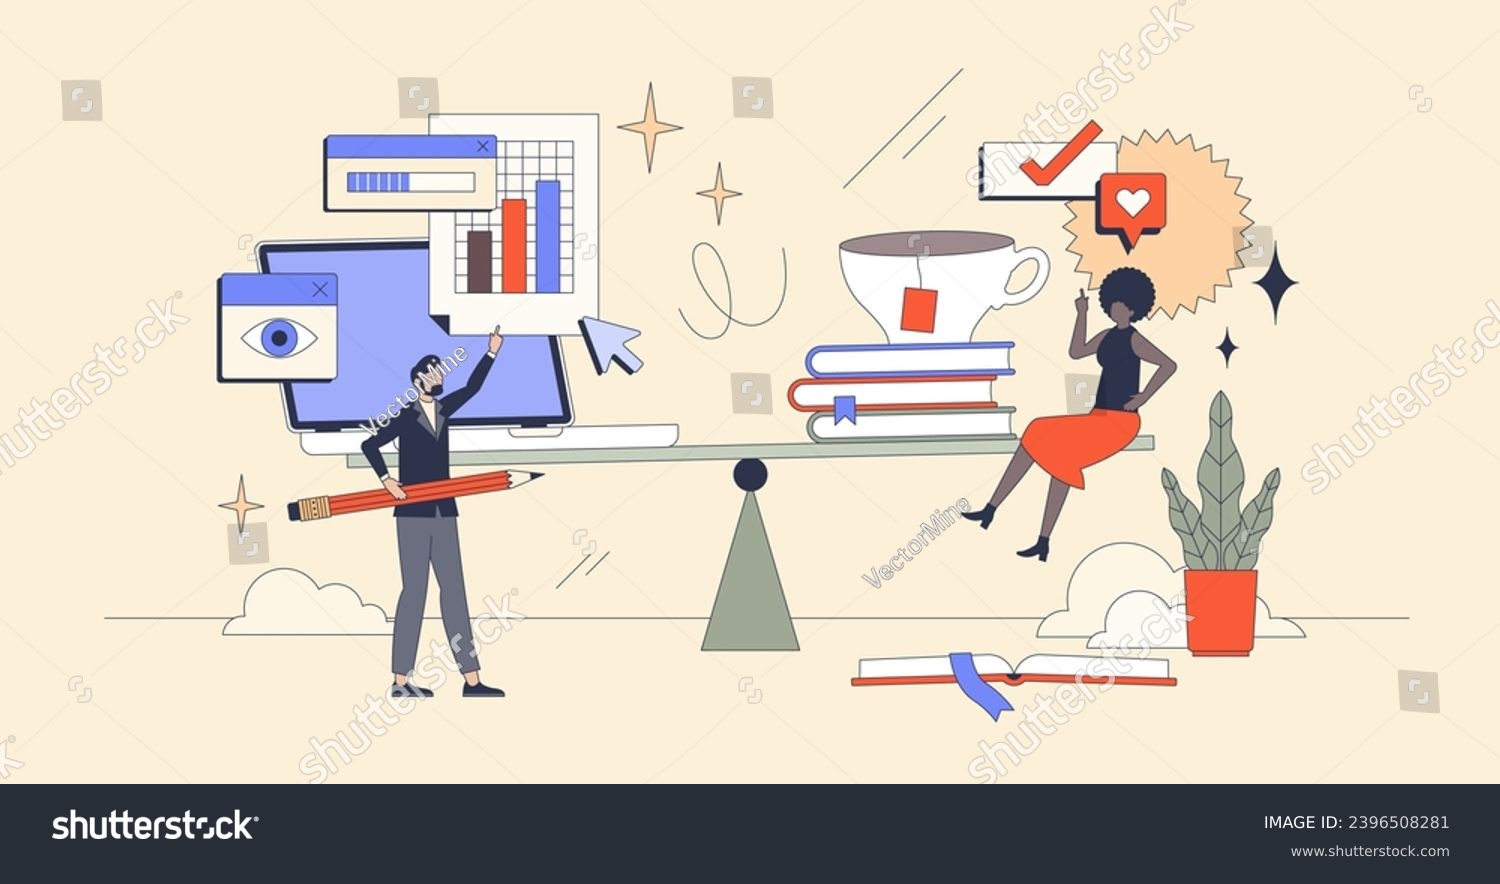 Work life balance for Gen Z with work and leisure harmony retro tiny person concept. Weights with professional business career objectives or personal life and wellness priorities vector illustration. #2396508281